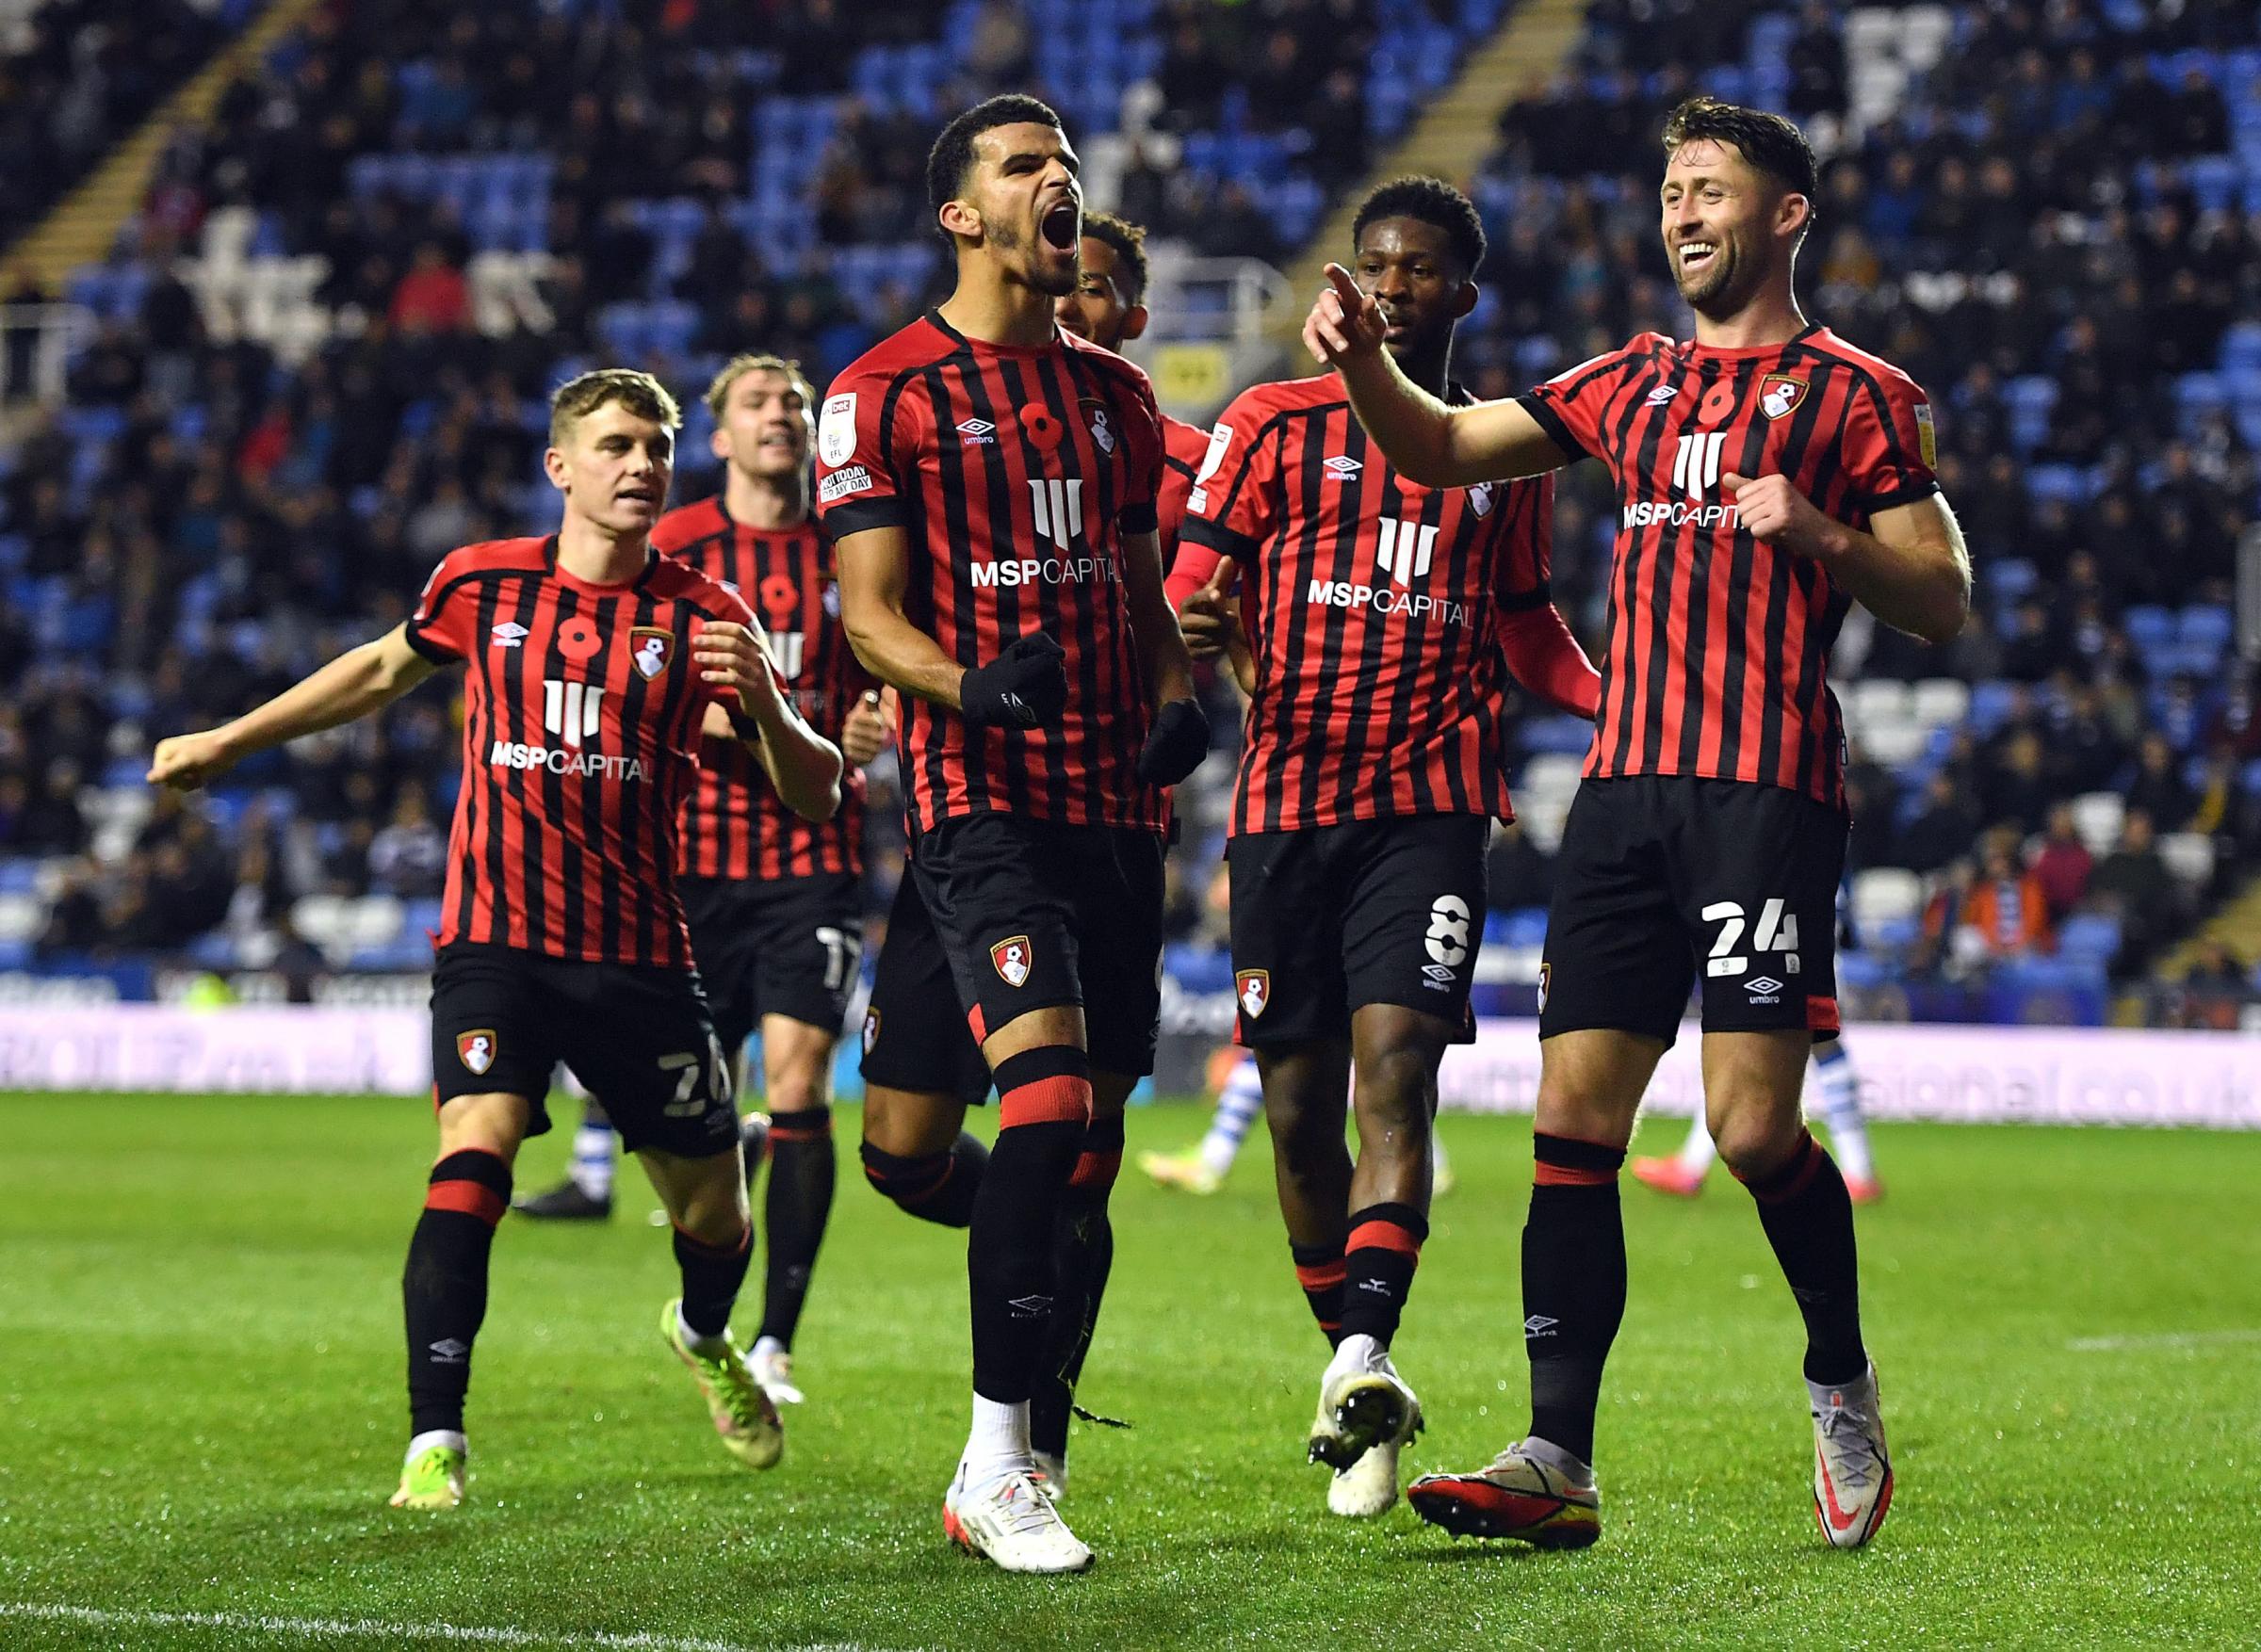 Royal away day for record-breaking Cherries at Reading